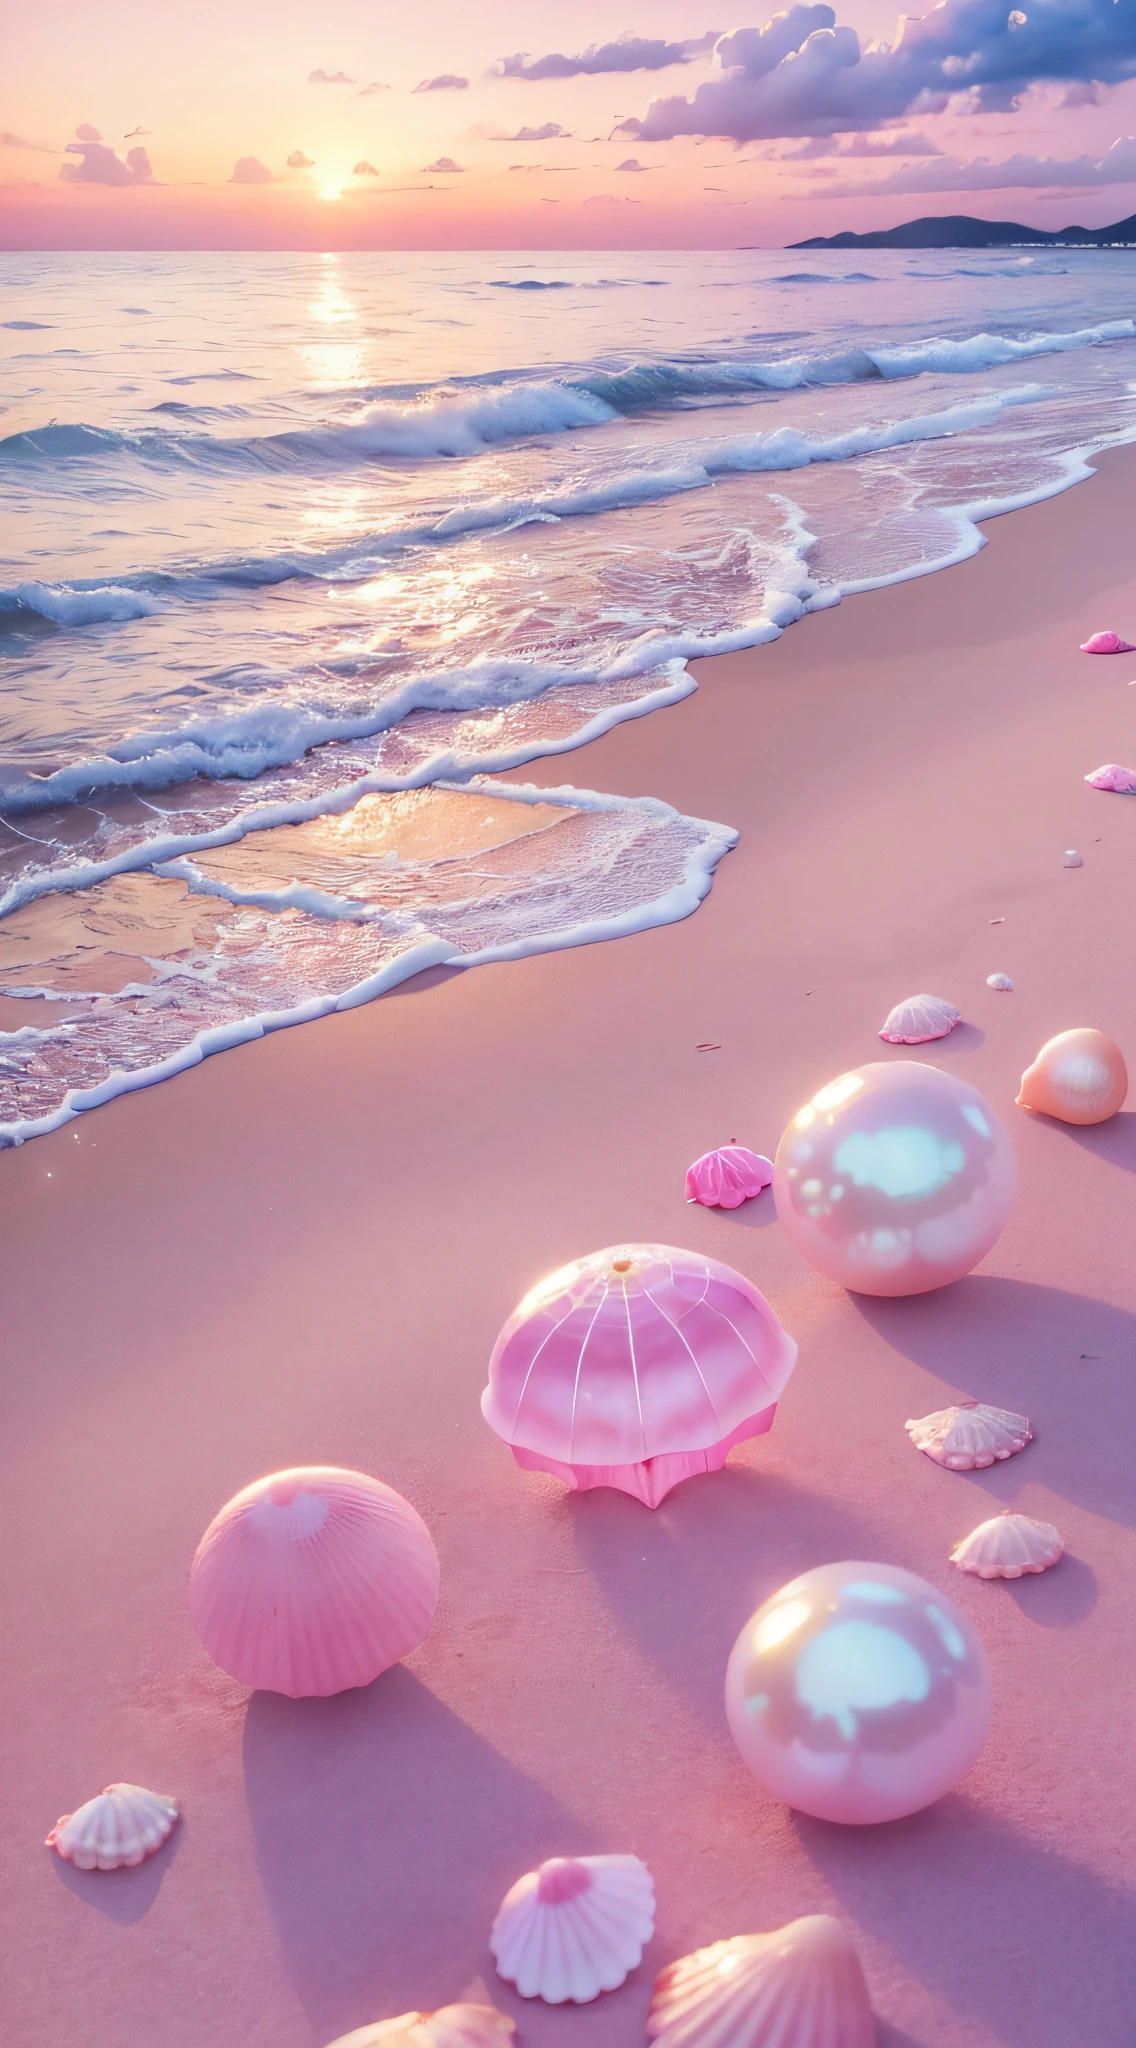 (8K, RAW photo, Best quality, masutepiece: 1.2), (Realistic, Realistic: 1.37) There are pink shells on the beach, there are waters, Pearlescent, pearls and shells, Soft spill, pearls, Pink jellyfish are everywhere, Soft 3D rendering, Ethereal bubbles, Bubble landscape, Elay shader, pastel pink, Pink reflections, Pearl Sky, shells, Paradise pink, Pastel colors, Pink pastels,